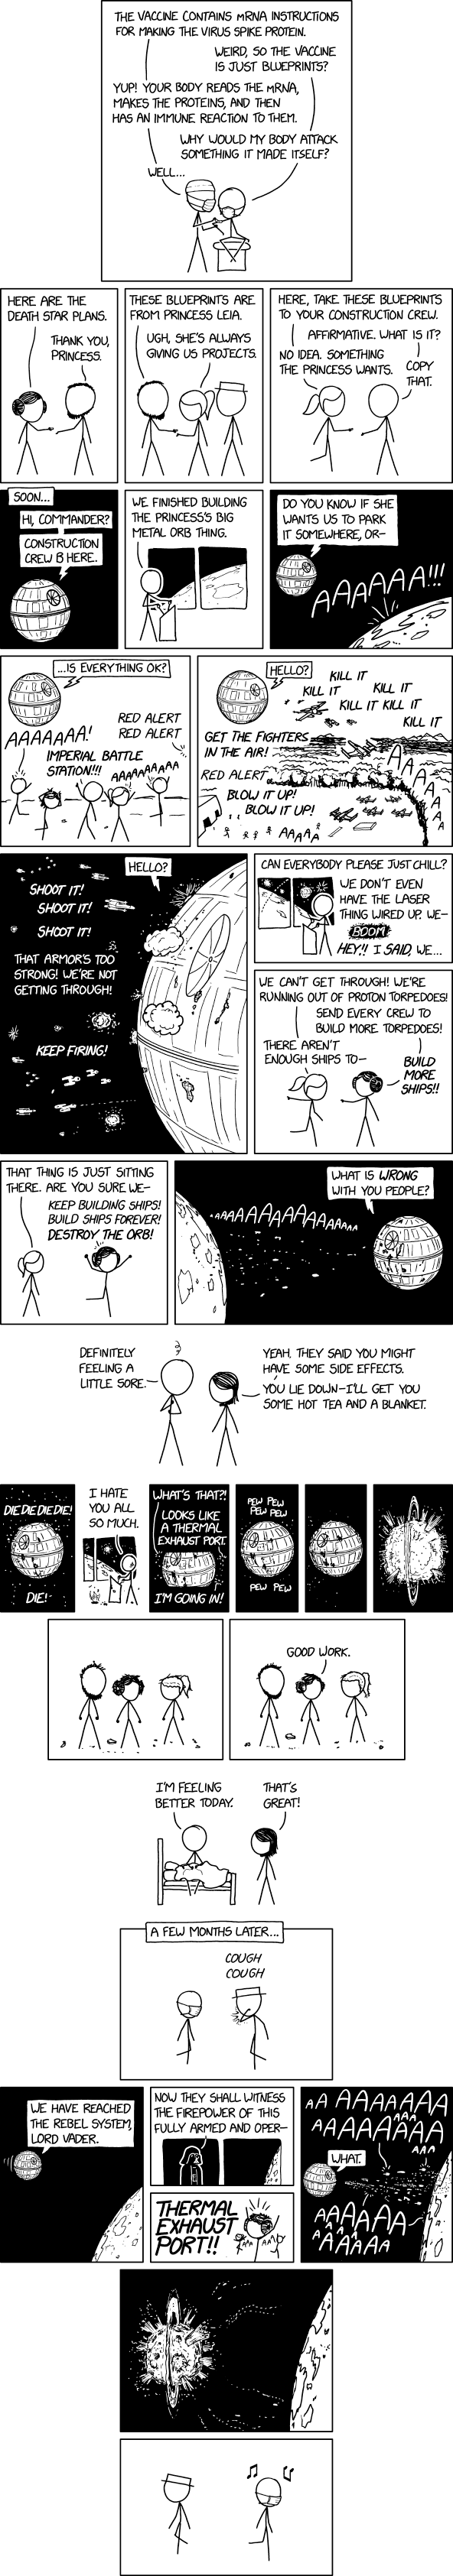 via   the comic delivery system monikered   Randall Munroe   resident at   XKCD  !